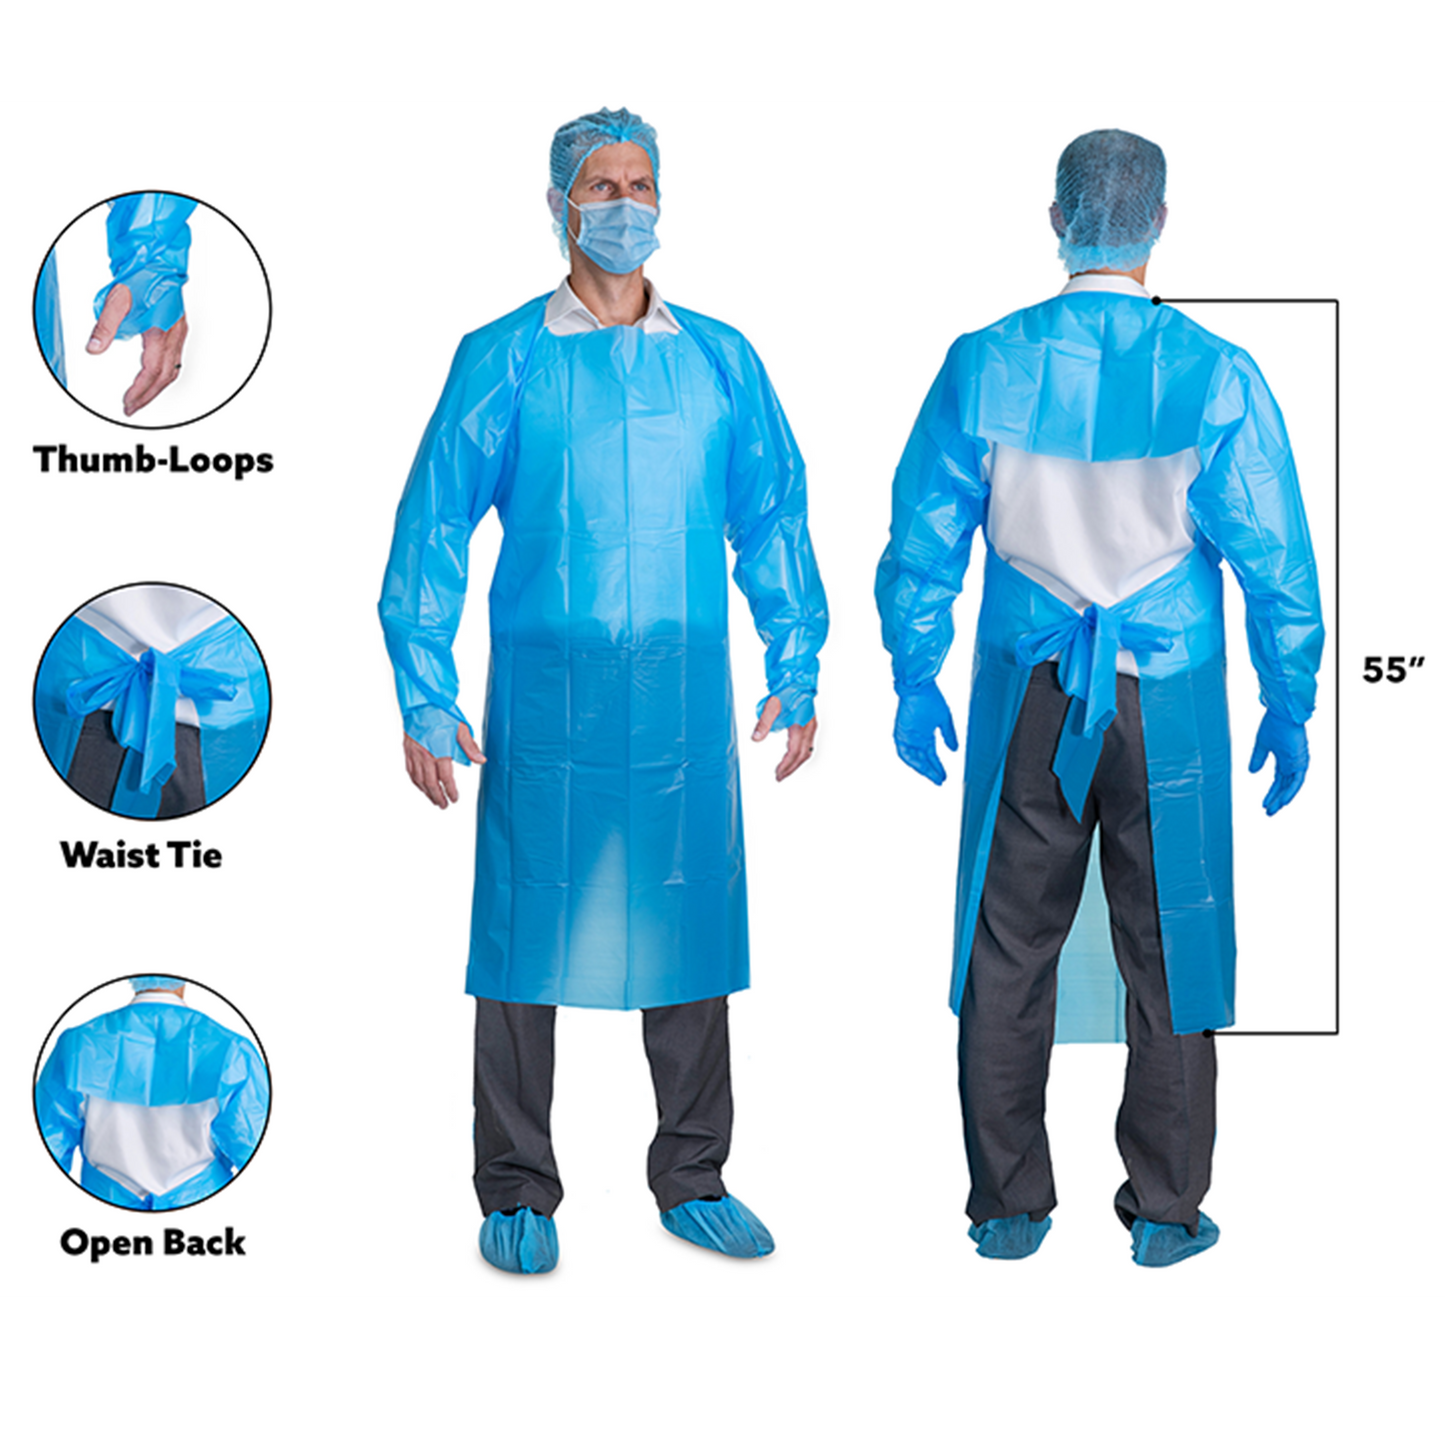 Isolation Gown Features